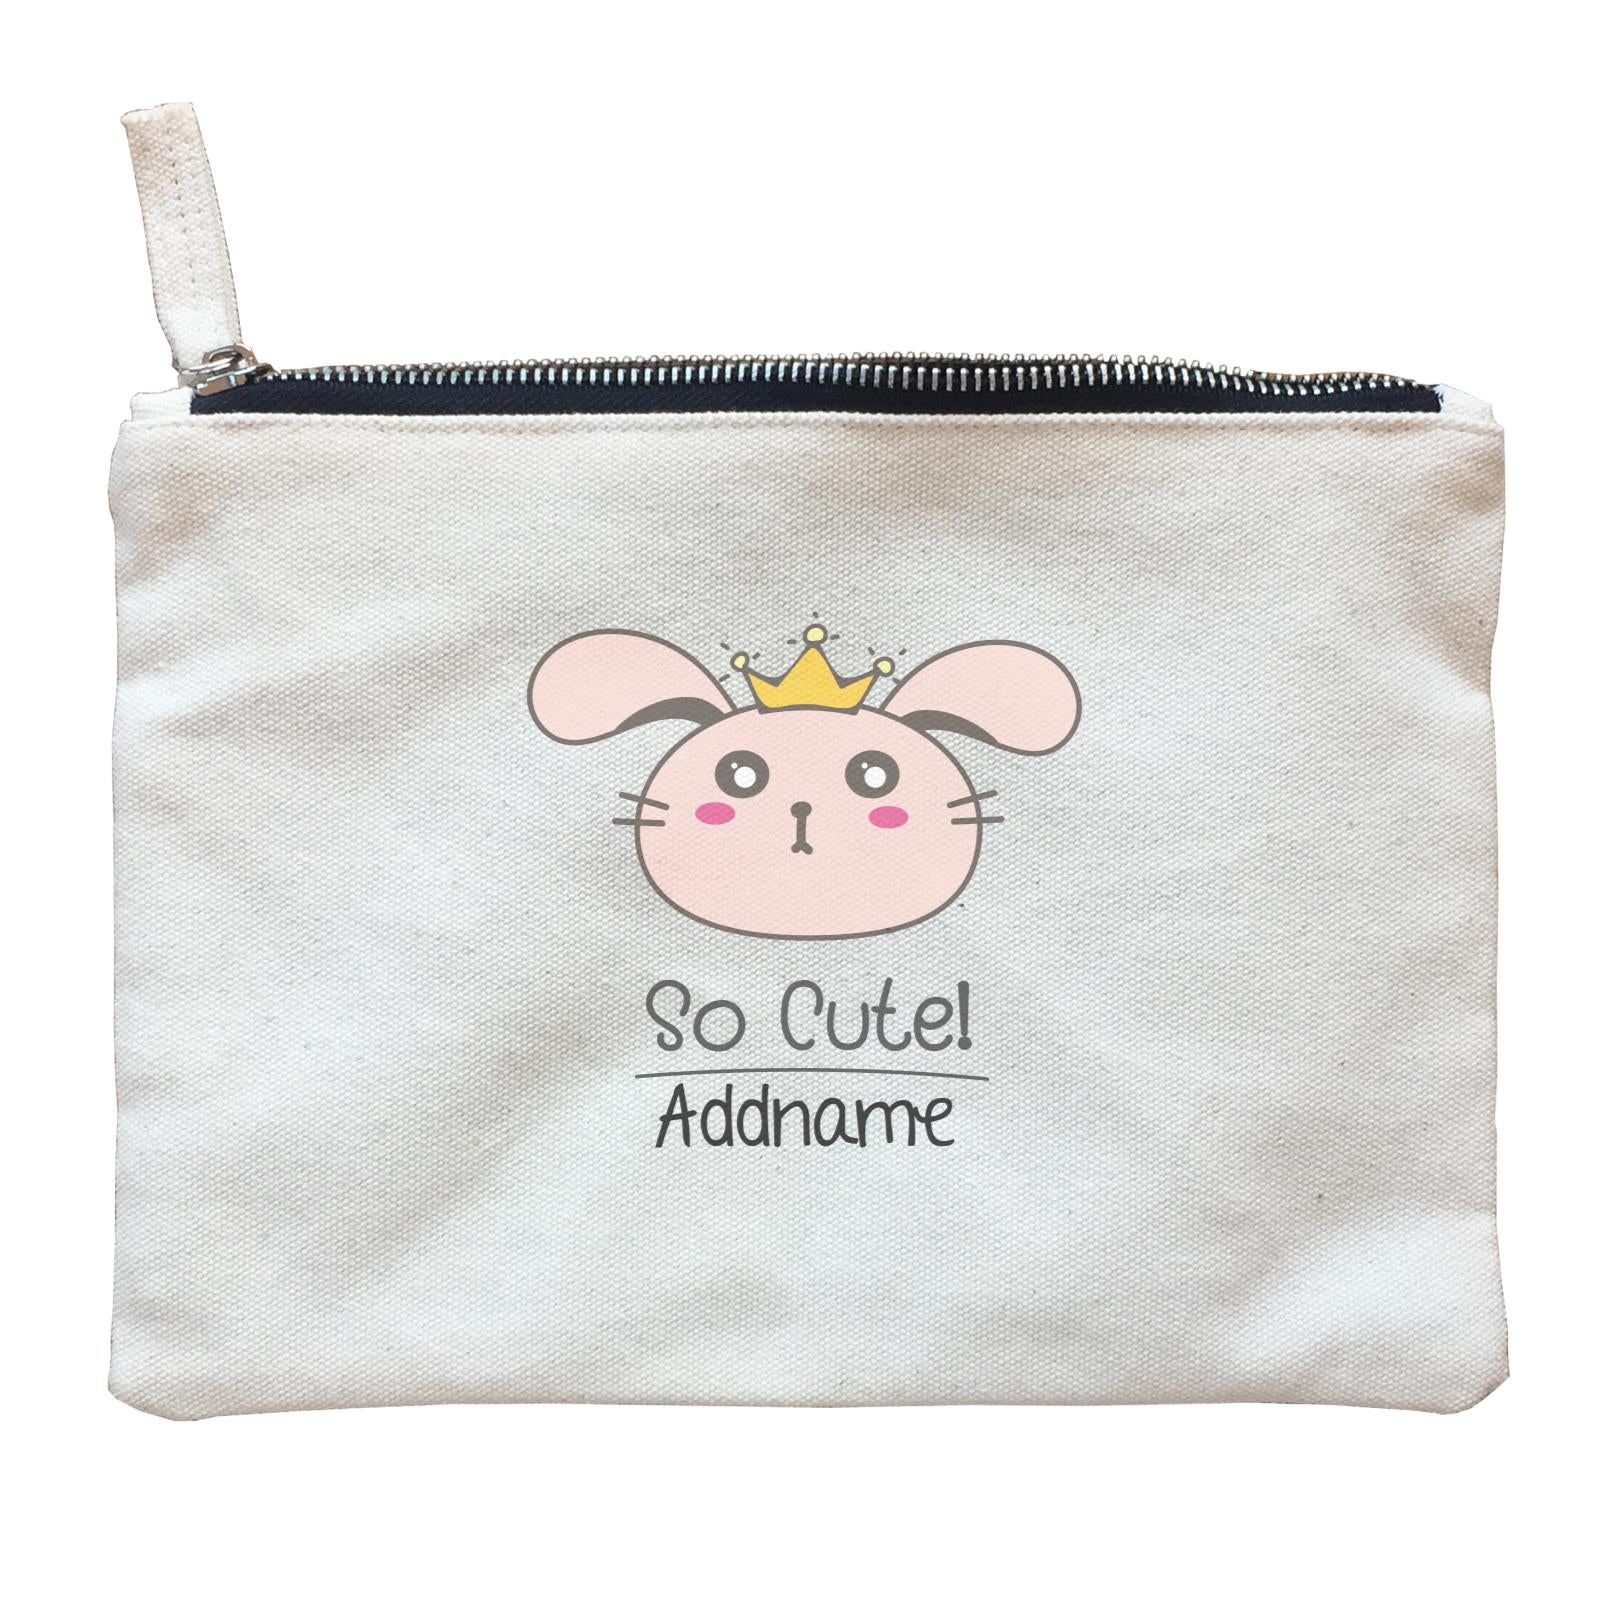 Cute Animals And Friends Series Cute Bunny With Crown Addname Zipper Pouch